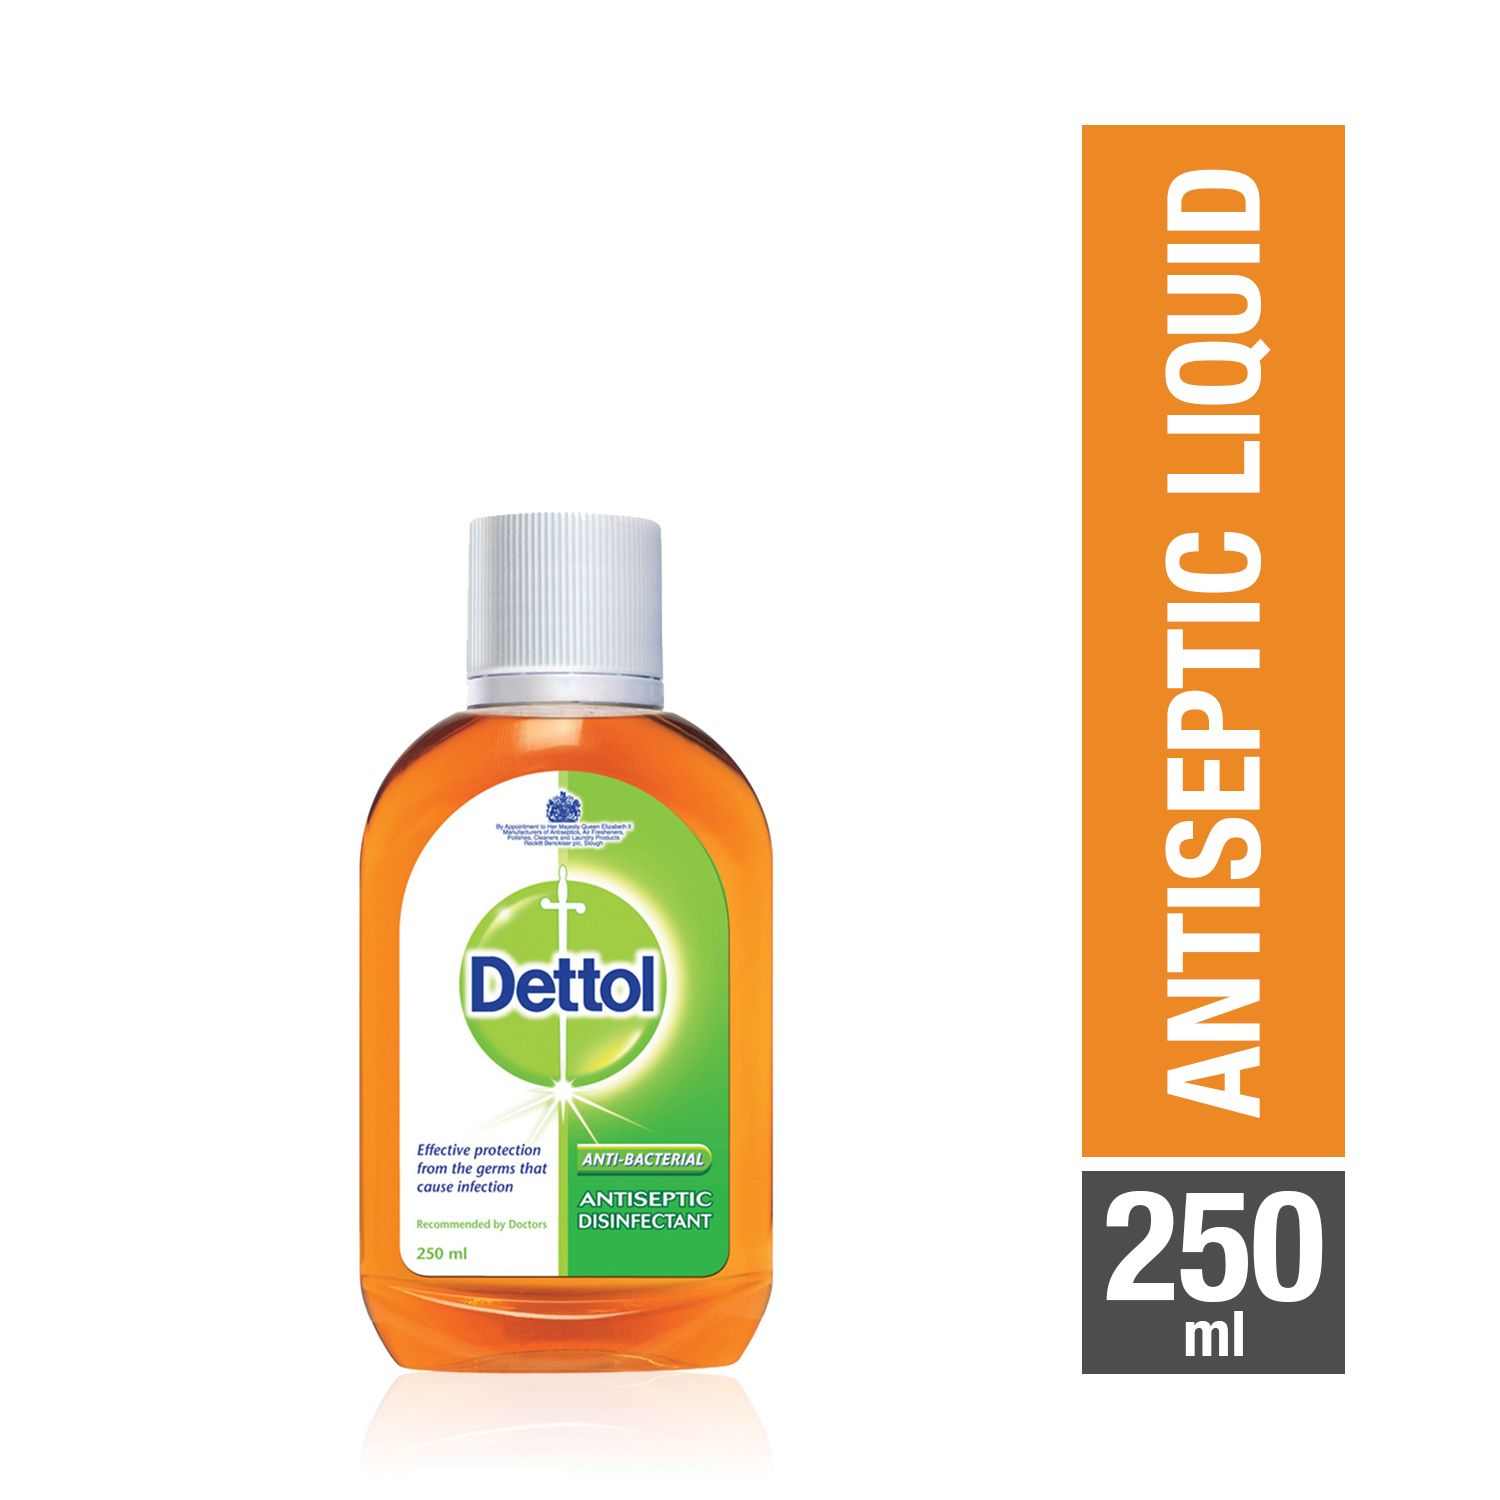 Dettol Anti Bacterial Antiseptic Disinfectant